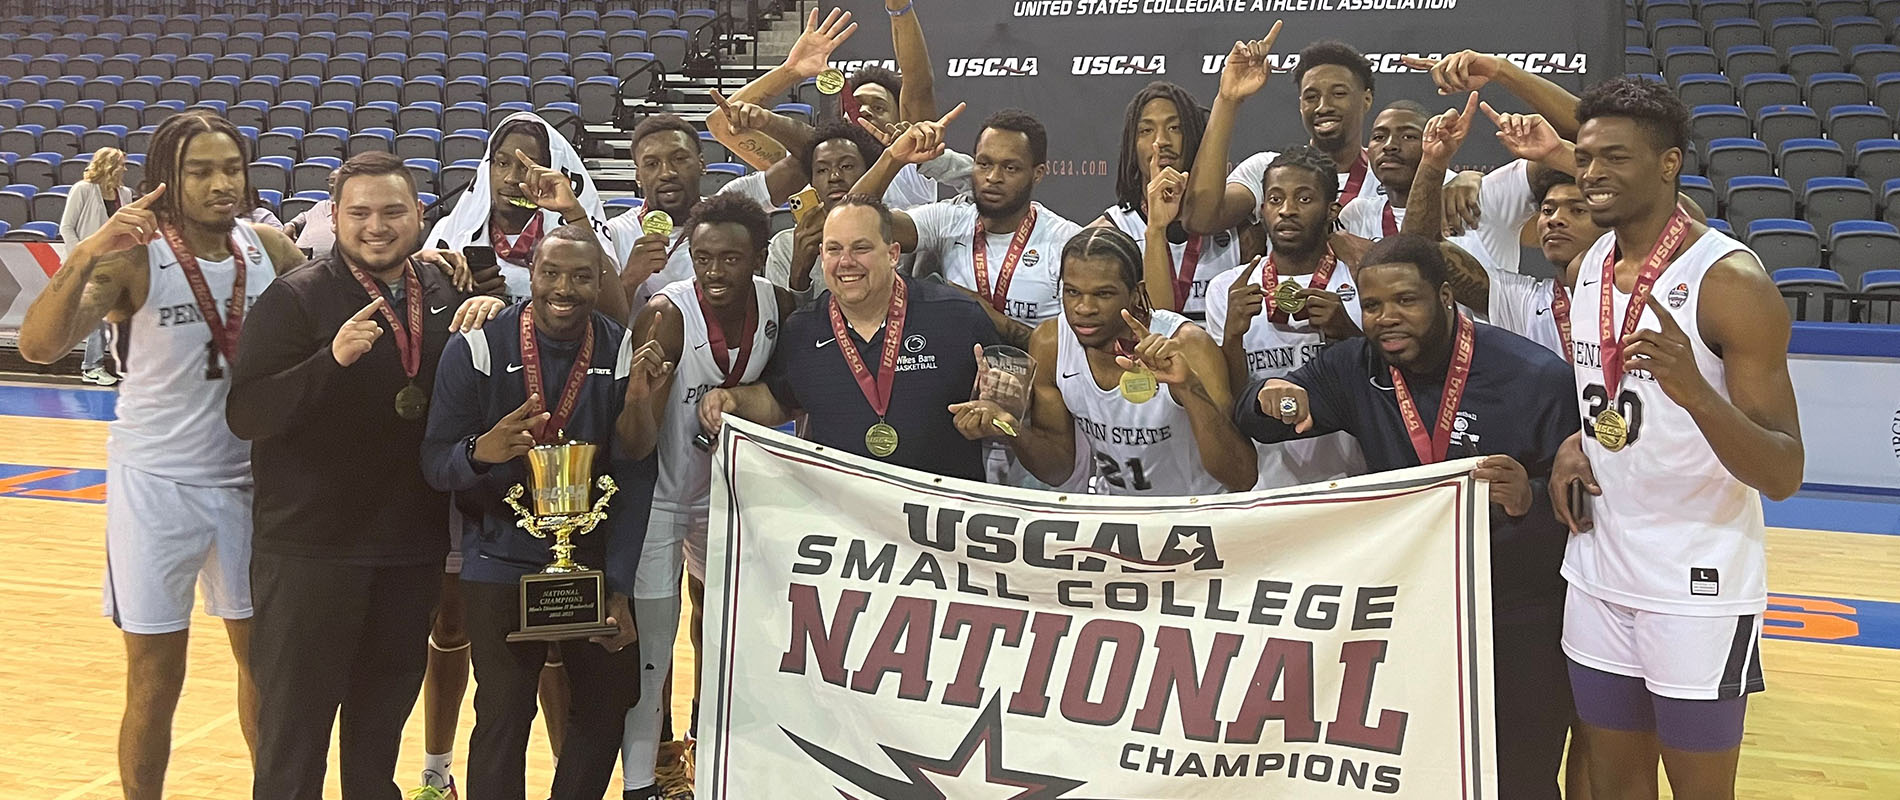 Penn State Wilkes-Barre captured the 2023 USCAA Men's Division II Basketball National Championship on Thursday, March 16 at the Virginia State University Multi-Purpose Center.